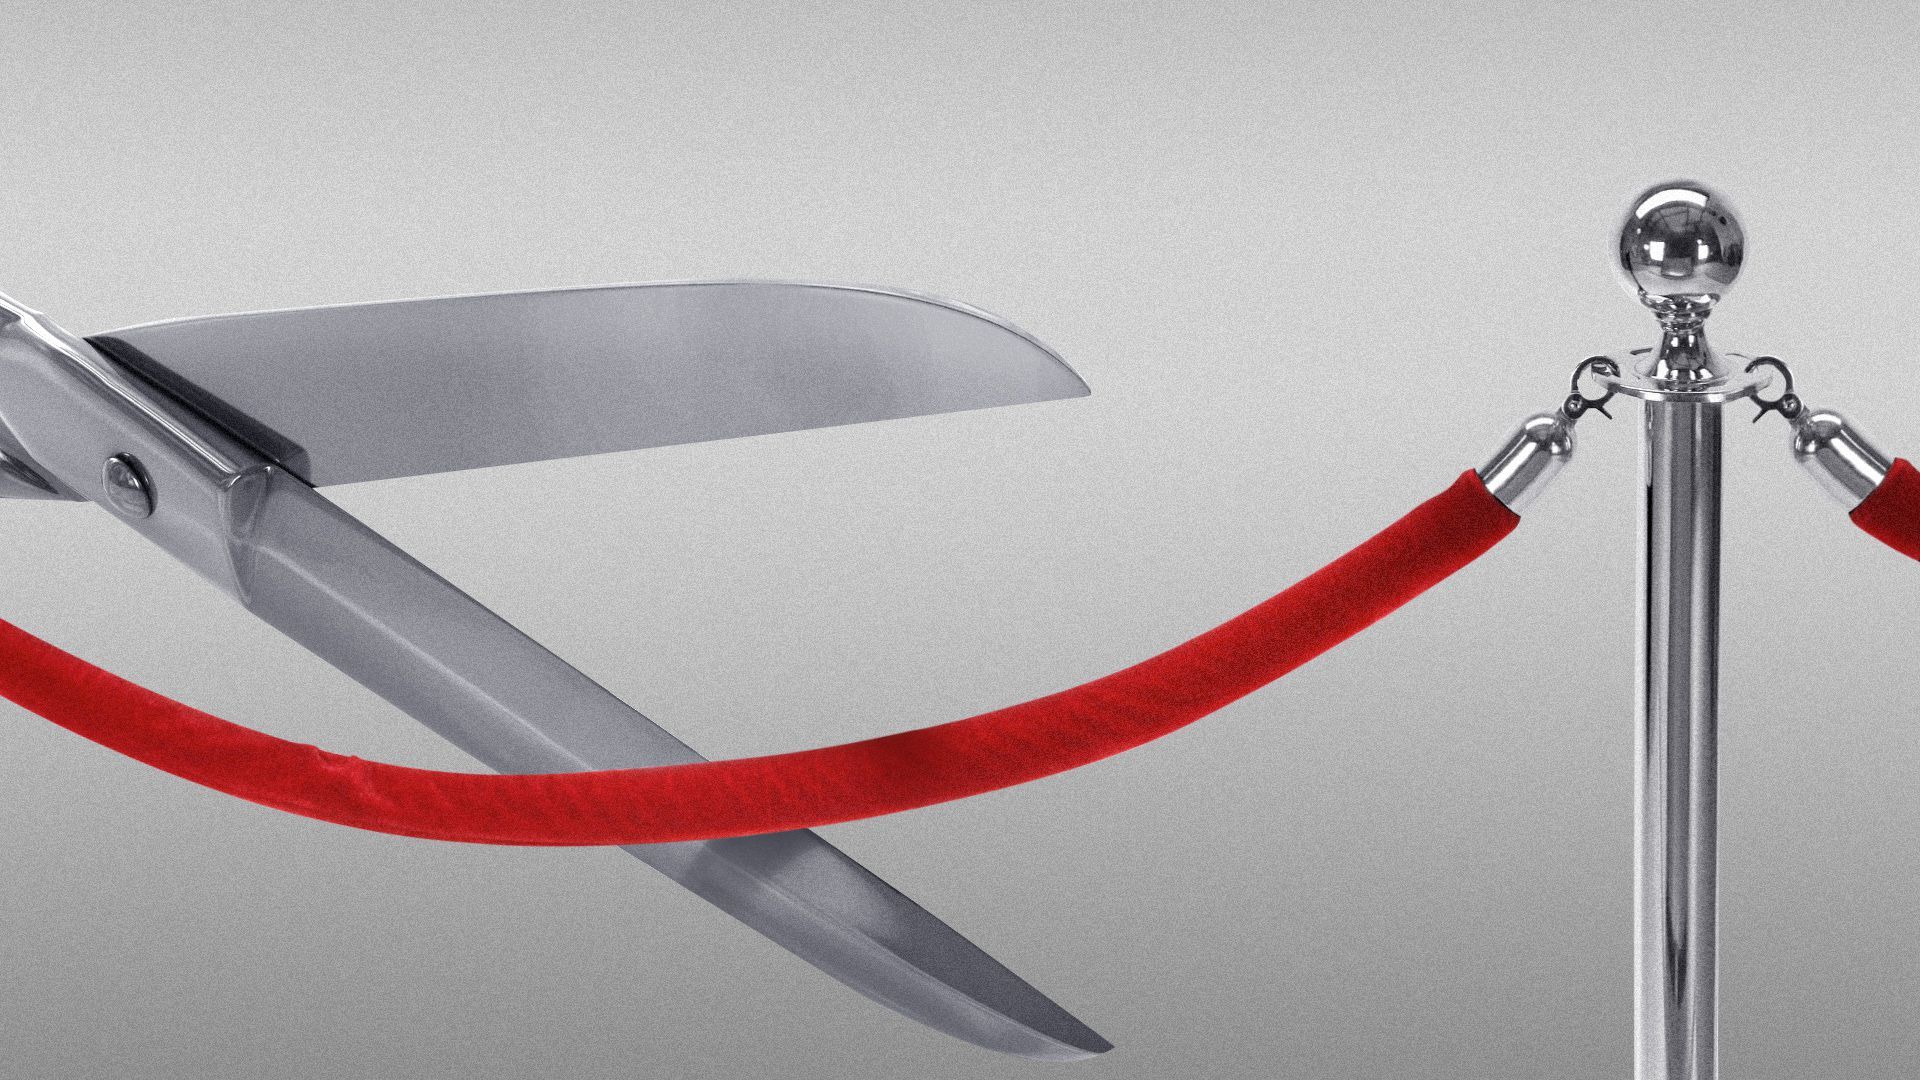 Illustration of a pair of scissors about to cut a velvet rope barrier. 